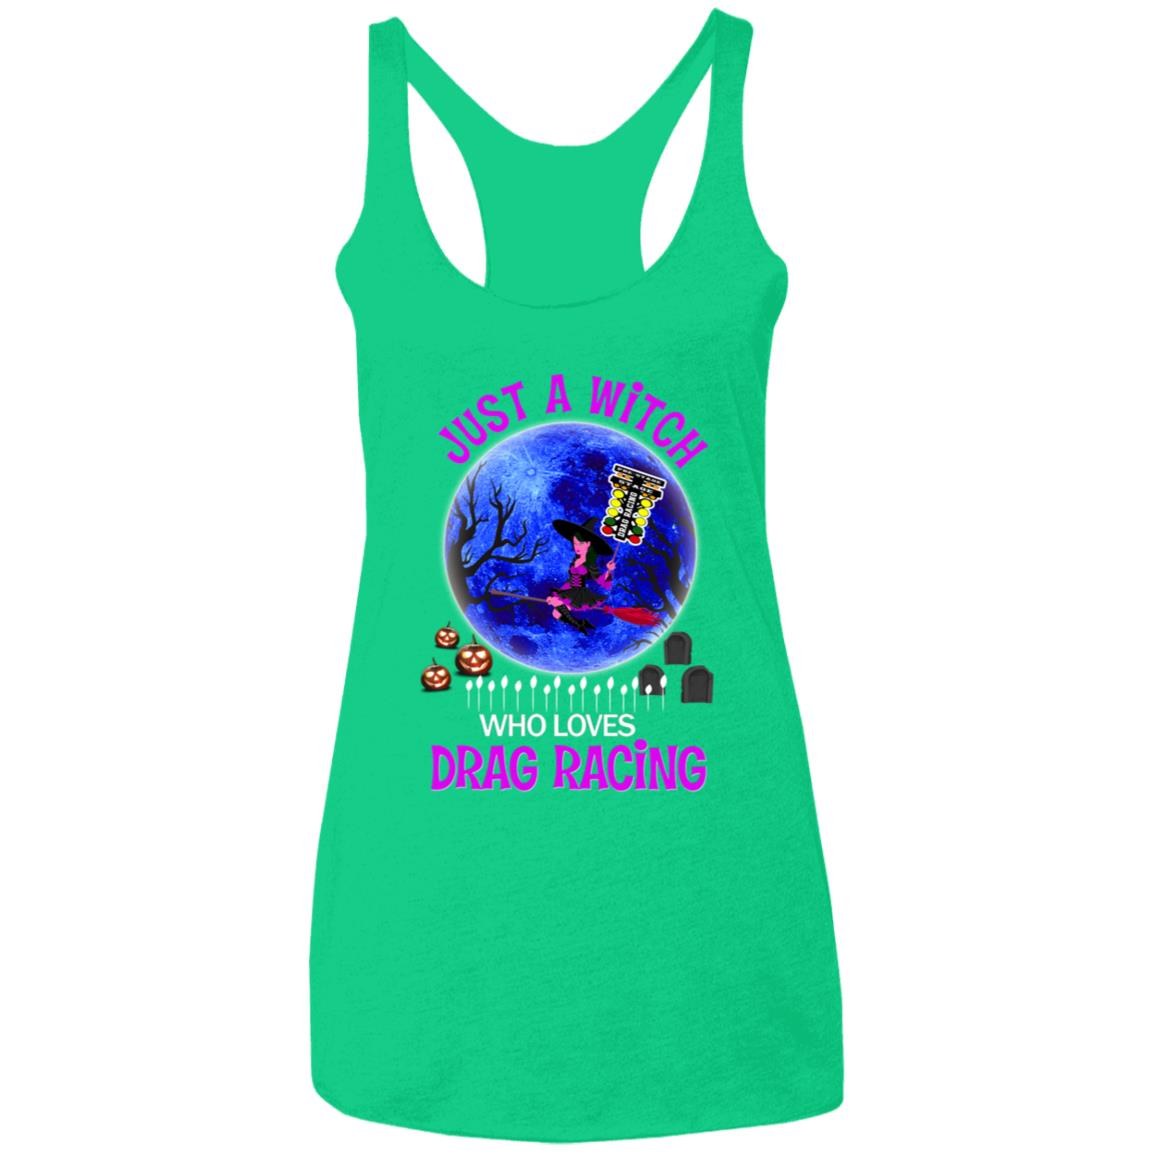 Just A Witch Who Loves Drag Racing Ladies' Triblend Racerback Tank